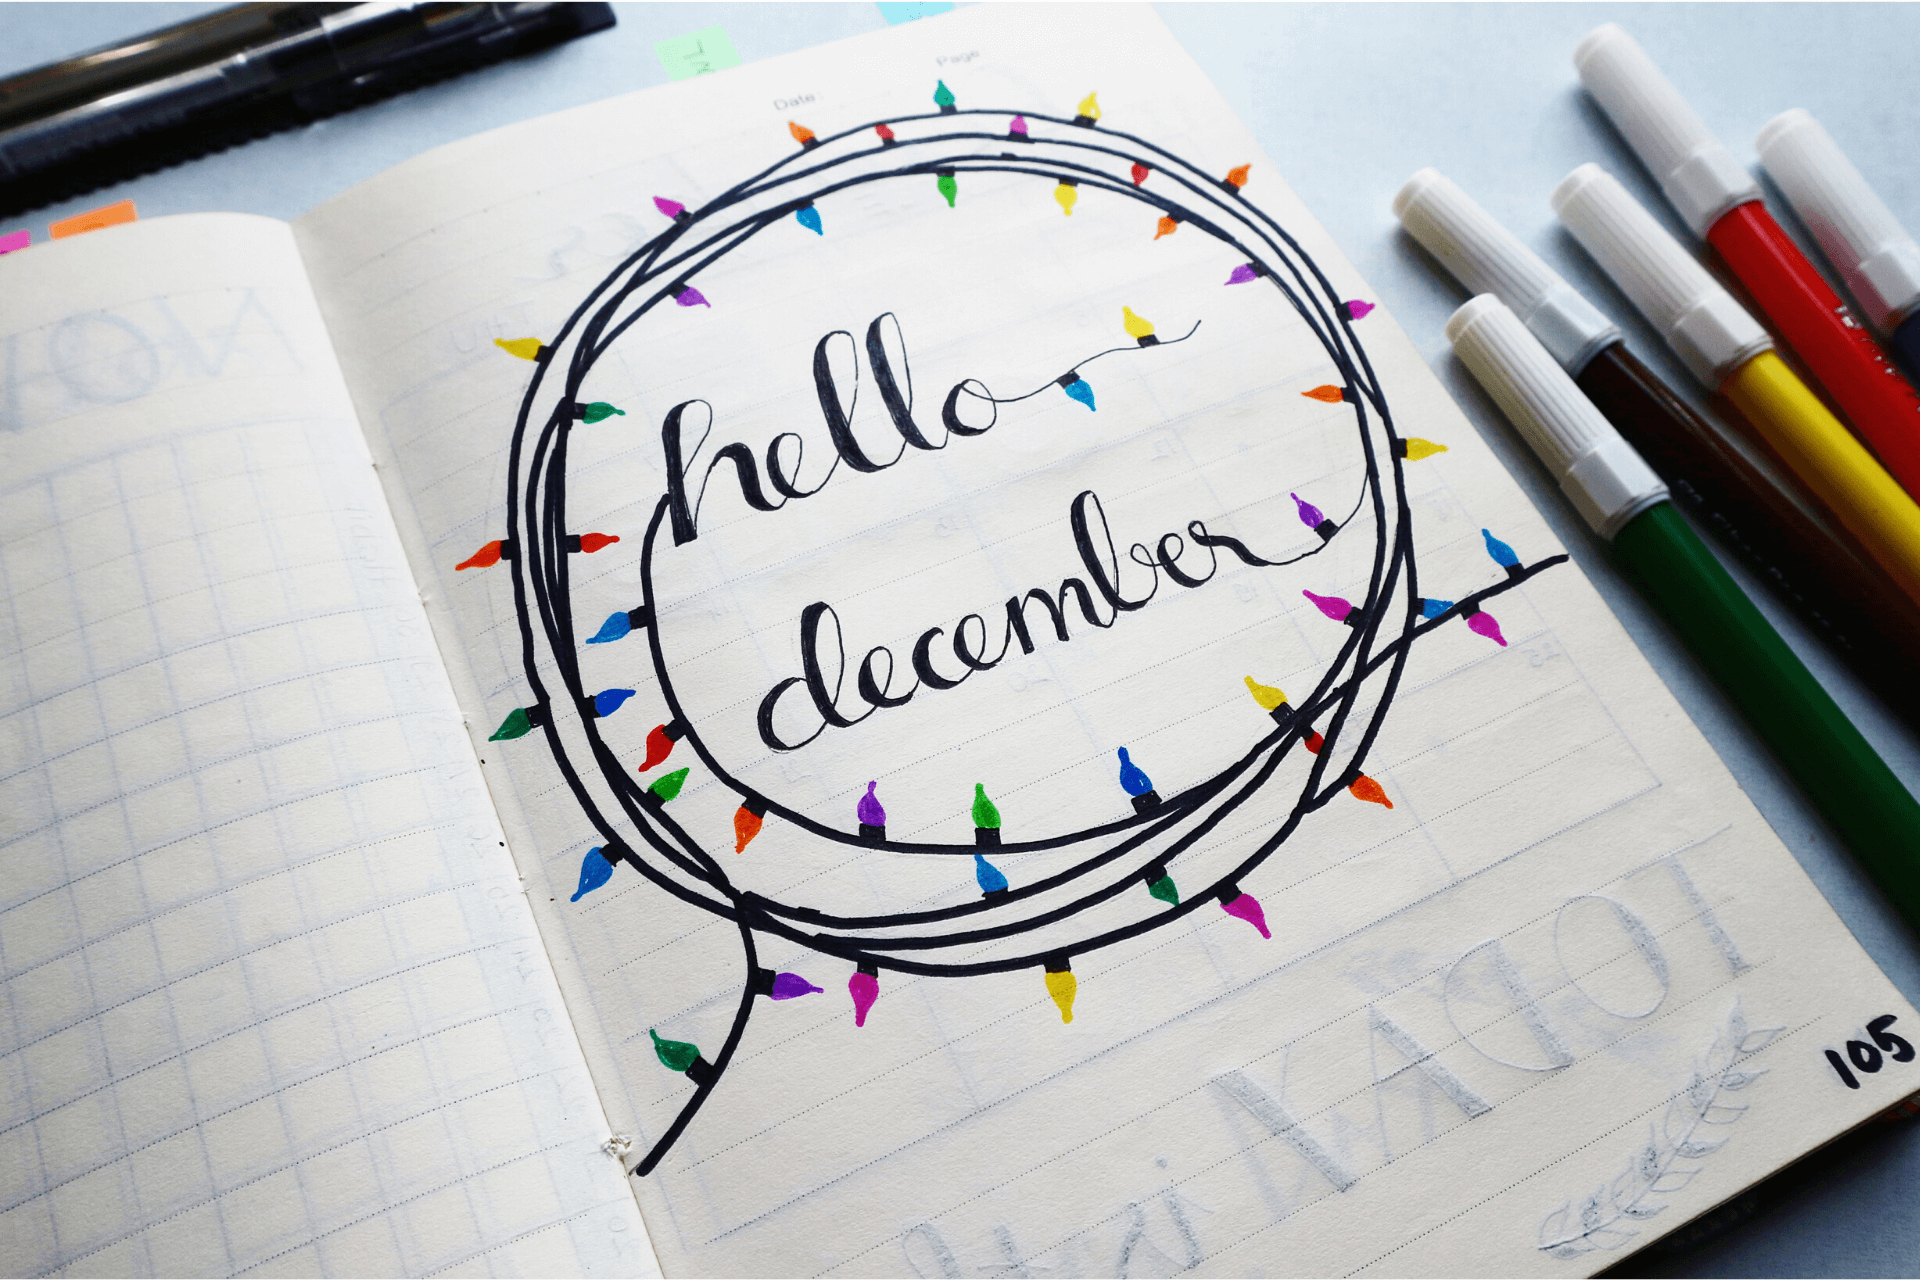 Top 12 Fundraising Tips for December